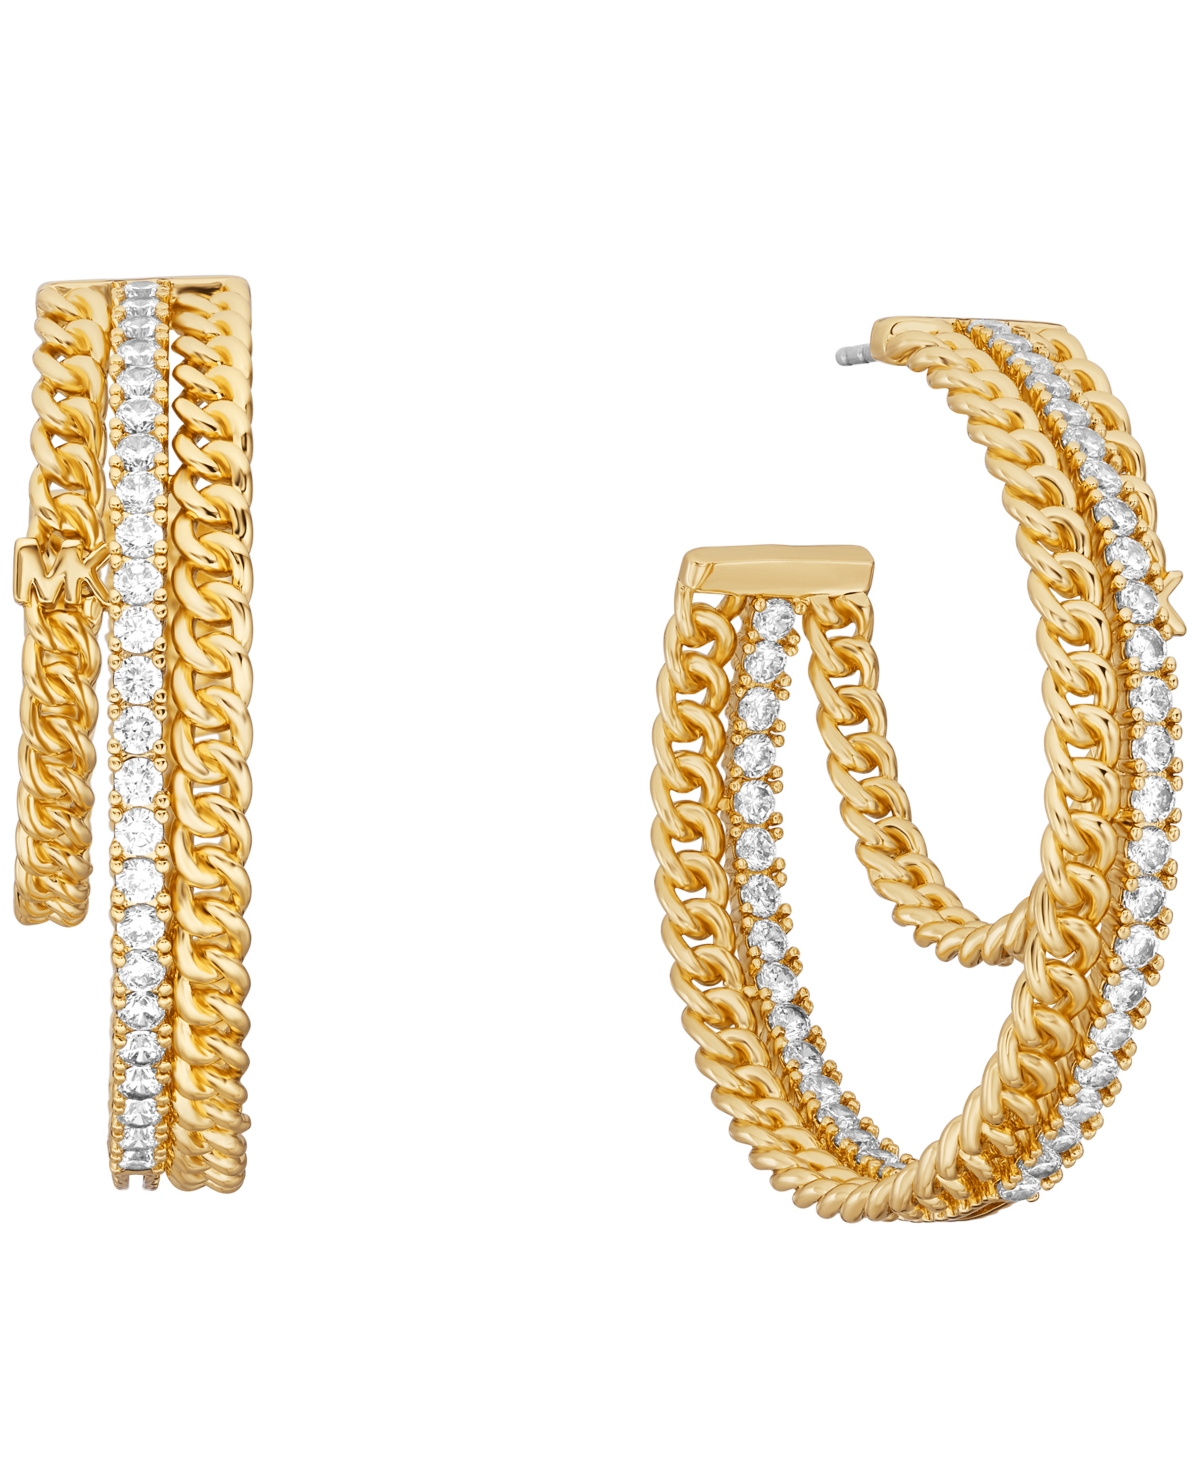 Michael Kors 14k Gold Plated Double Layer Chain Hoop Earrings